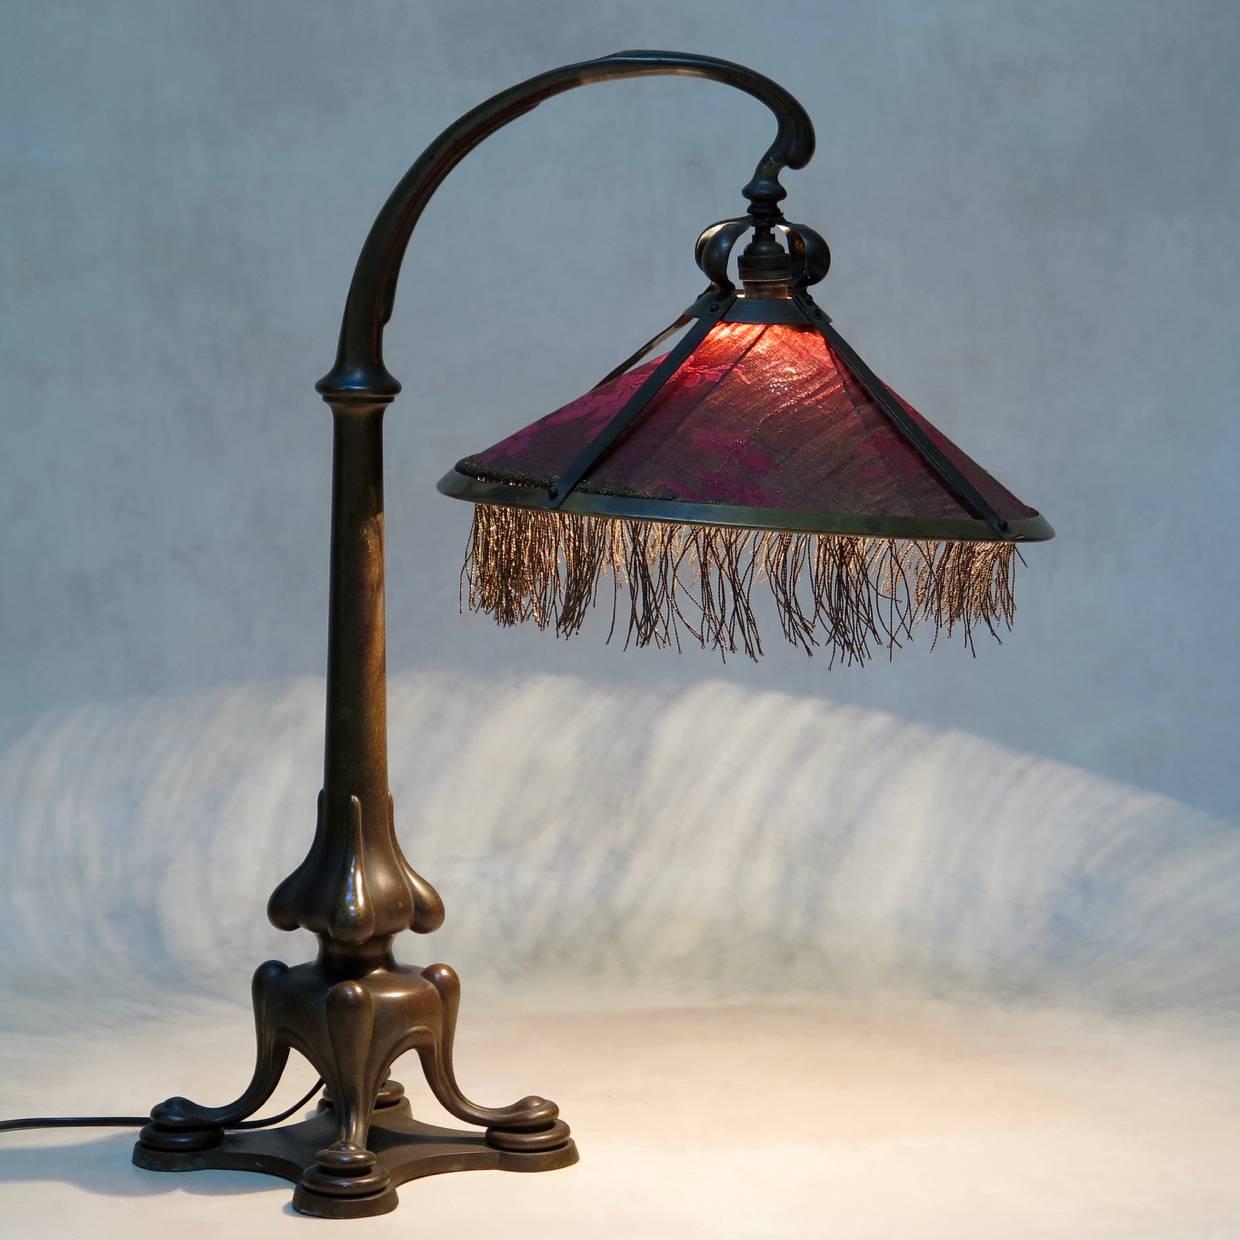 Elegant and heavy desk lamp made out of bronze and fitted with a dusky pink and metallic thread shade.